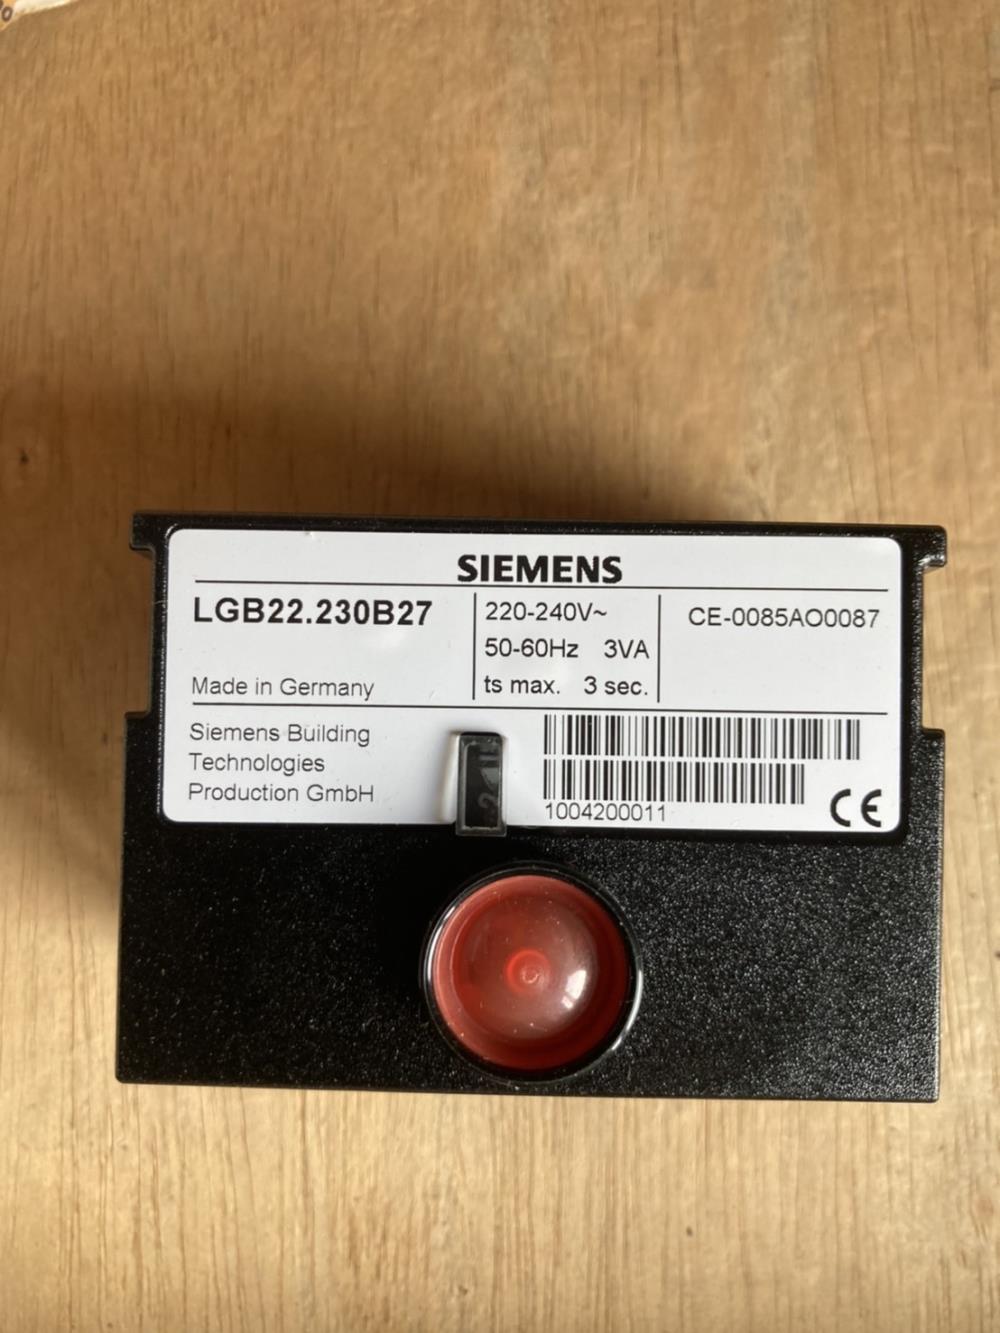 SIEMENS LGB22.230B27,SIEMENS LGB22.230B27,SIEMENS LGB22.230B27,Instruments and Controls/Controllers